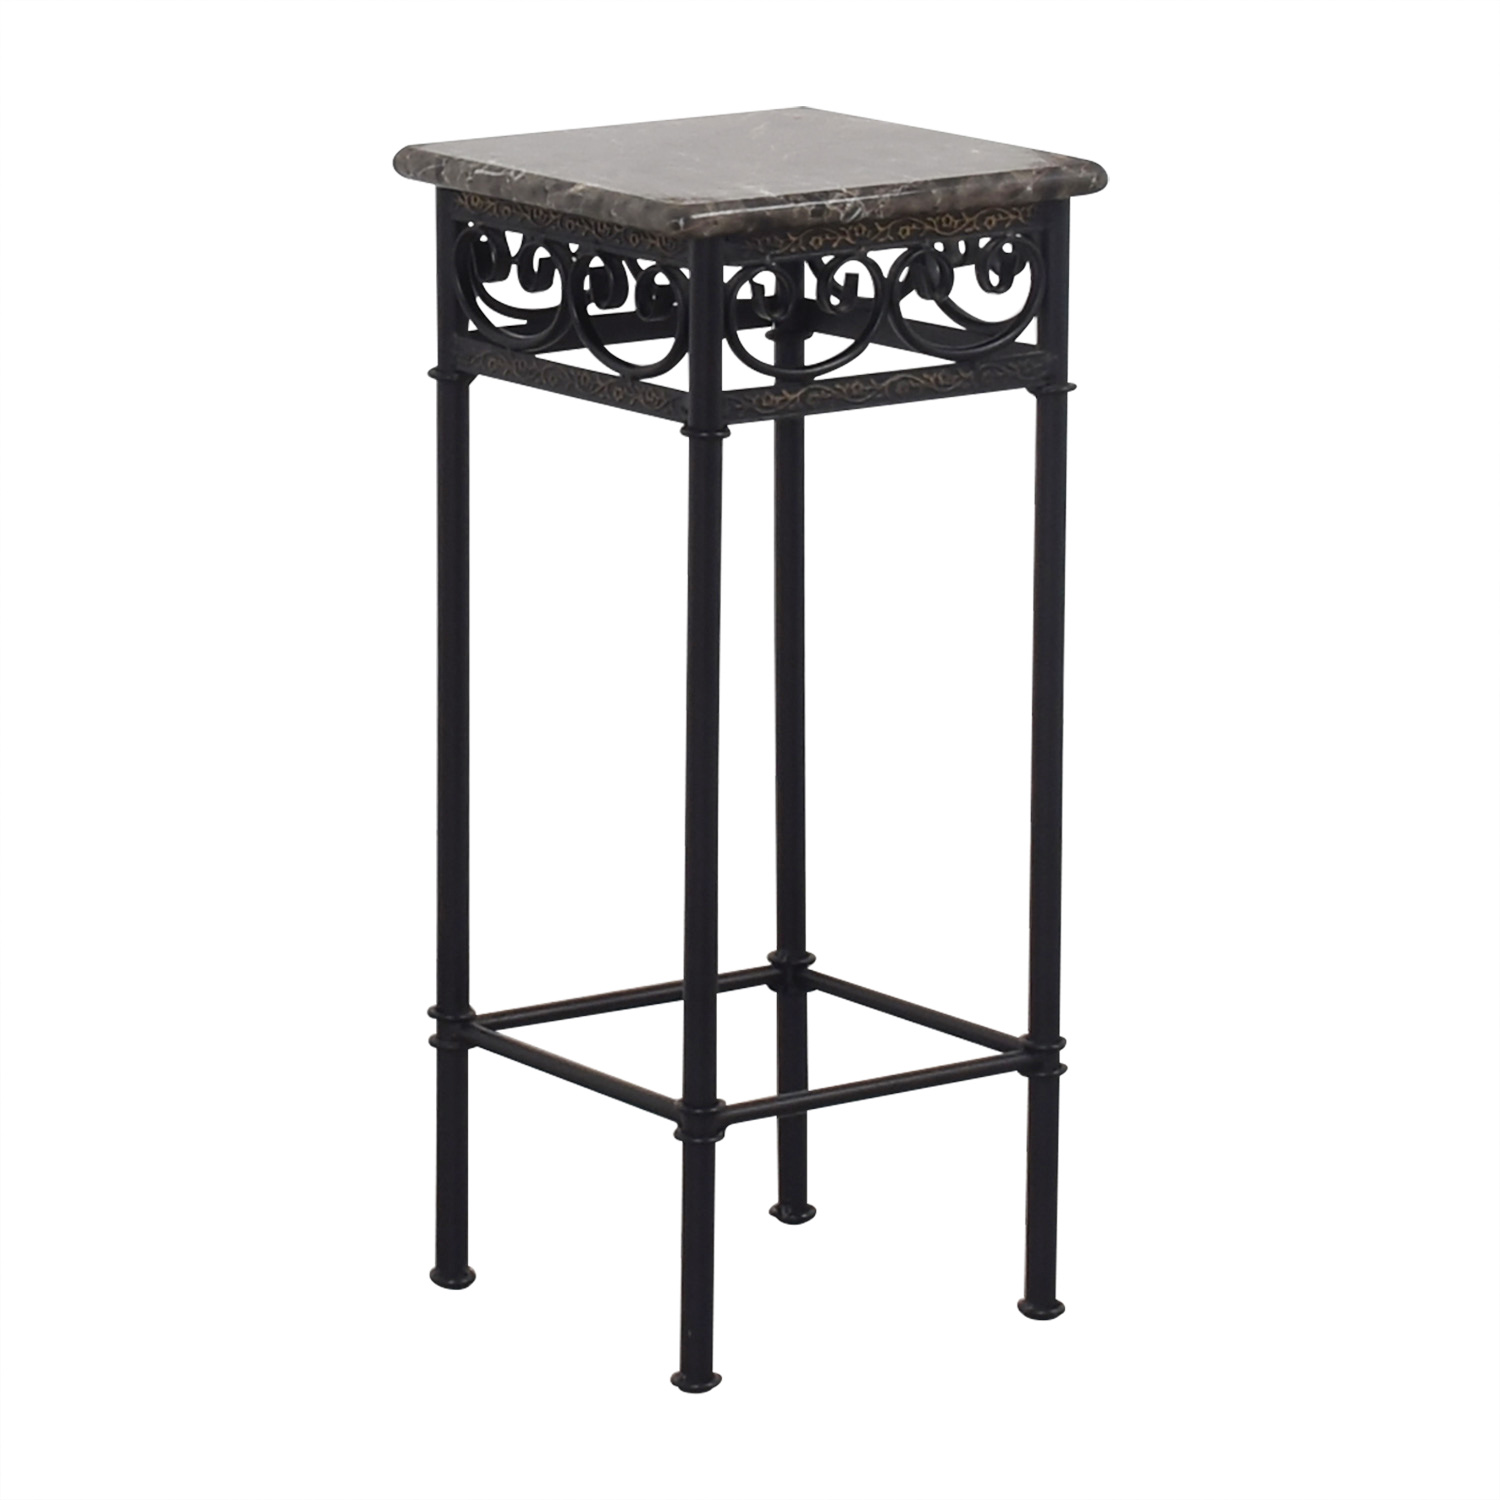 off faux marble with black metal base accent table tables second hand nesting console white elephant modern furniture brown patio side hampton bay website runner and placemats set